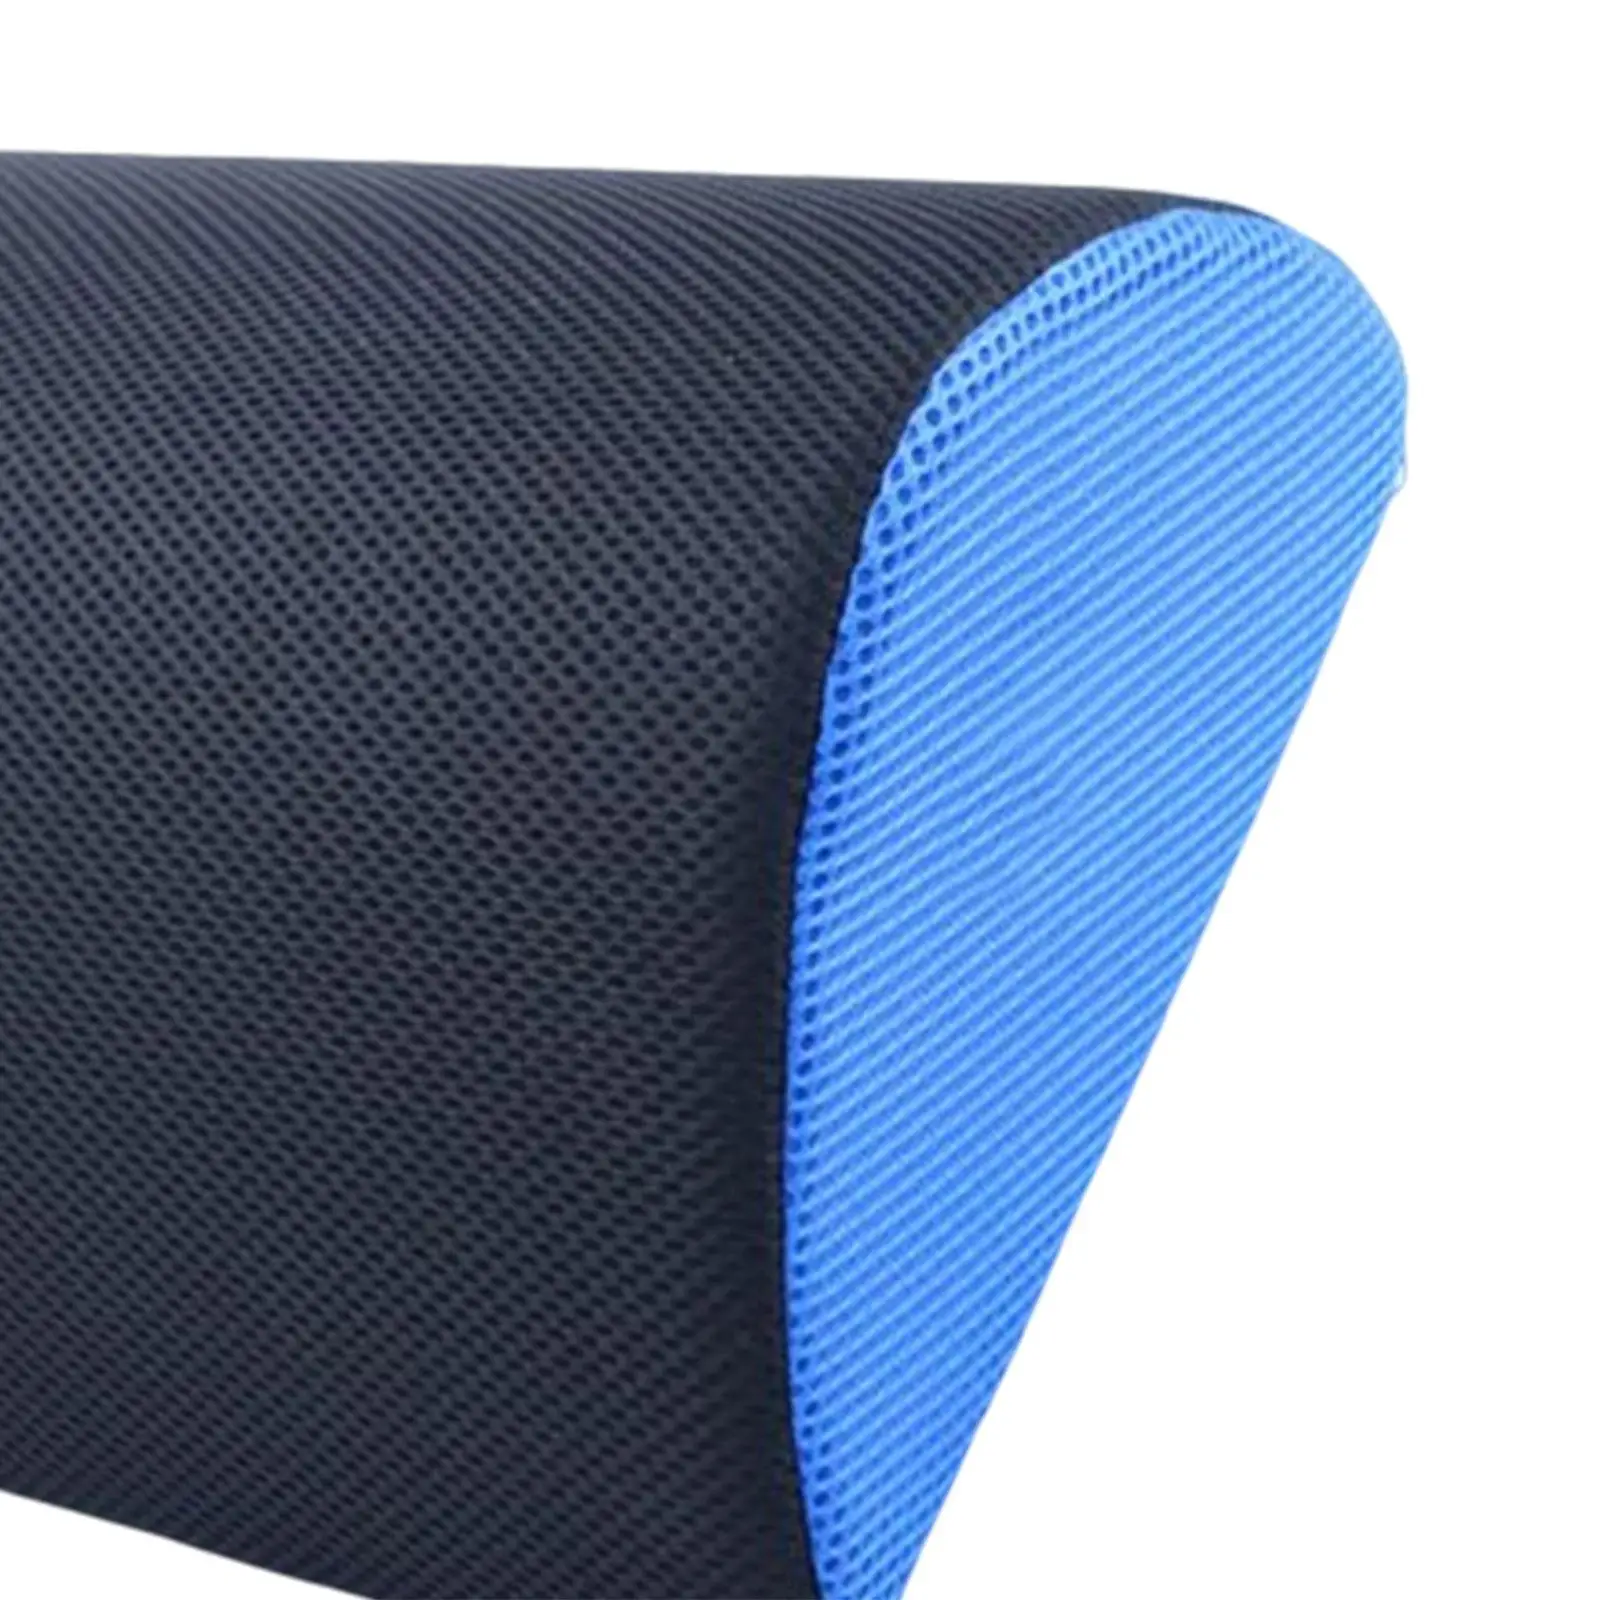 Leg Pillows Practical Mesh Cloth Cover Washable Removable Portable Footrest Cushion for Living Room Sofa Dormitory Elderly